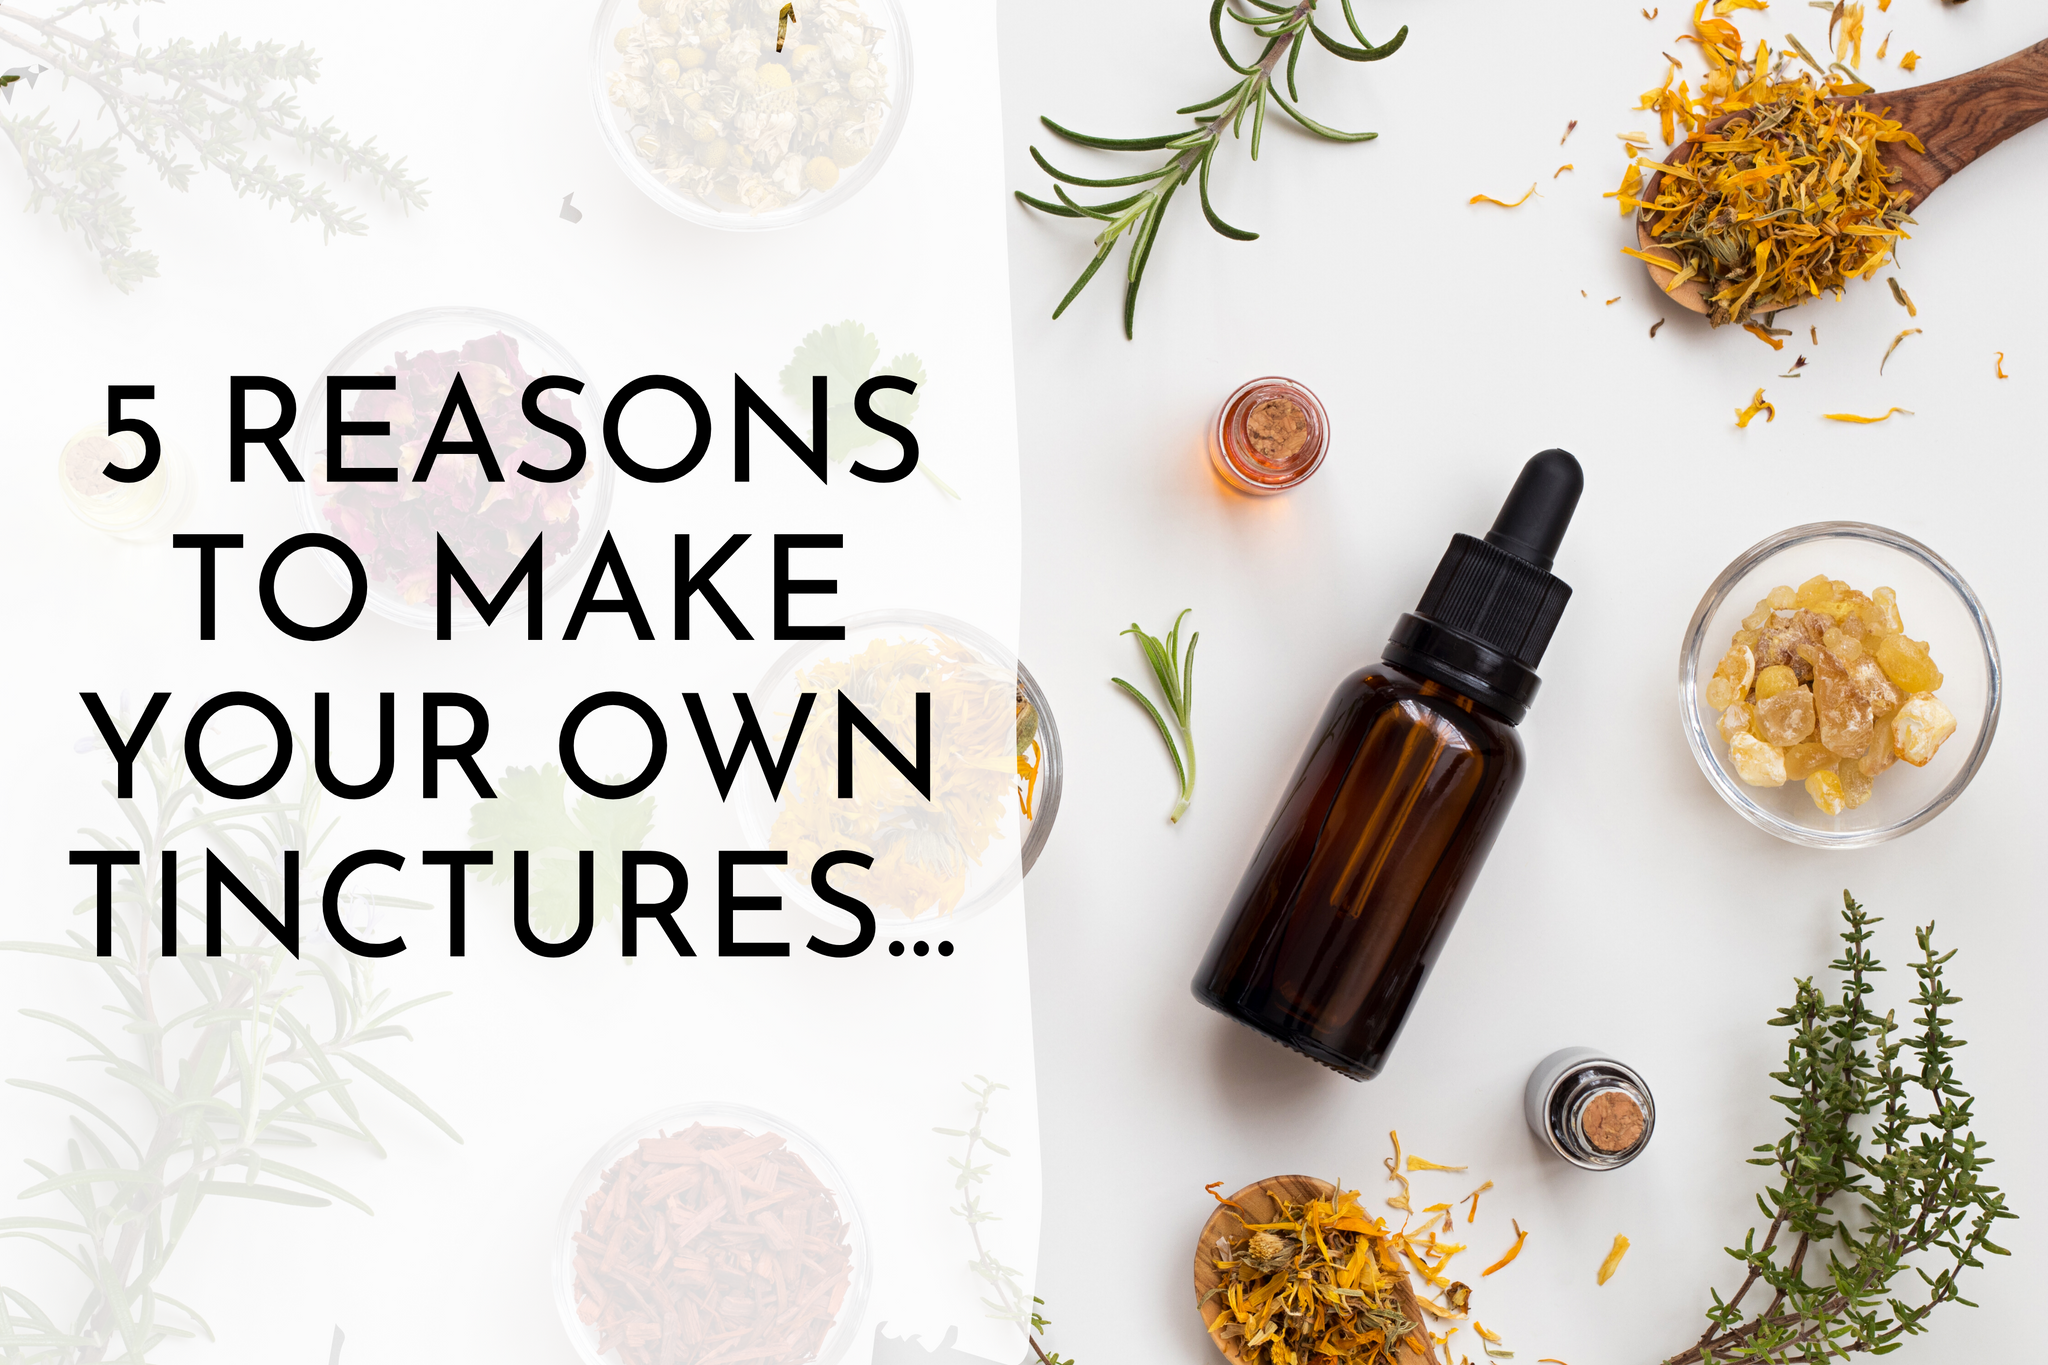 5 REASONS TO MAKE YOUR OWN TINCTURE BY ANATO REGENERATIVE SKINCARE